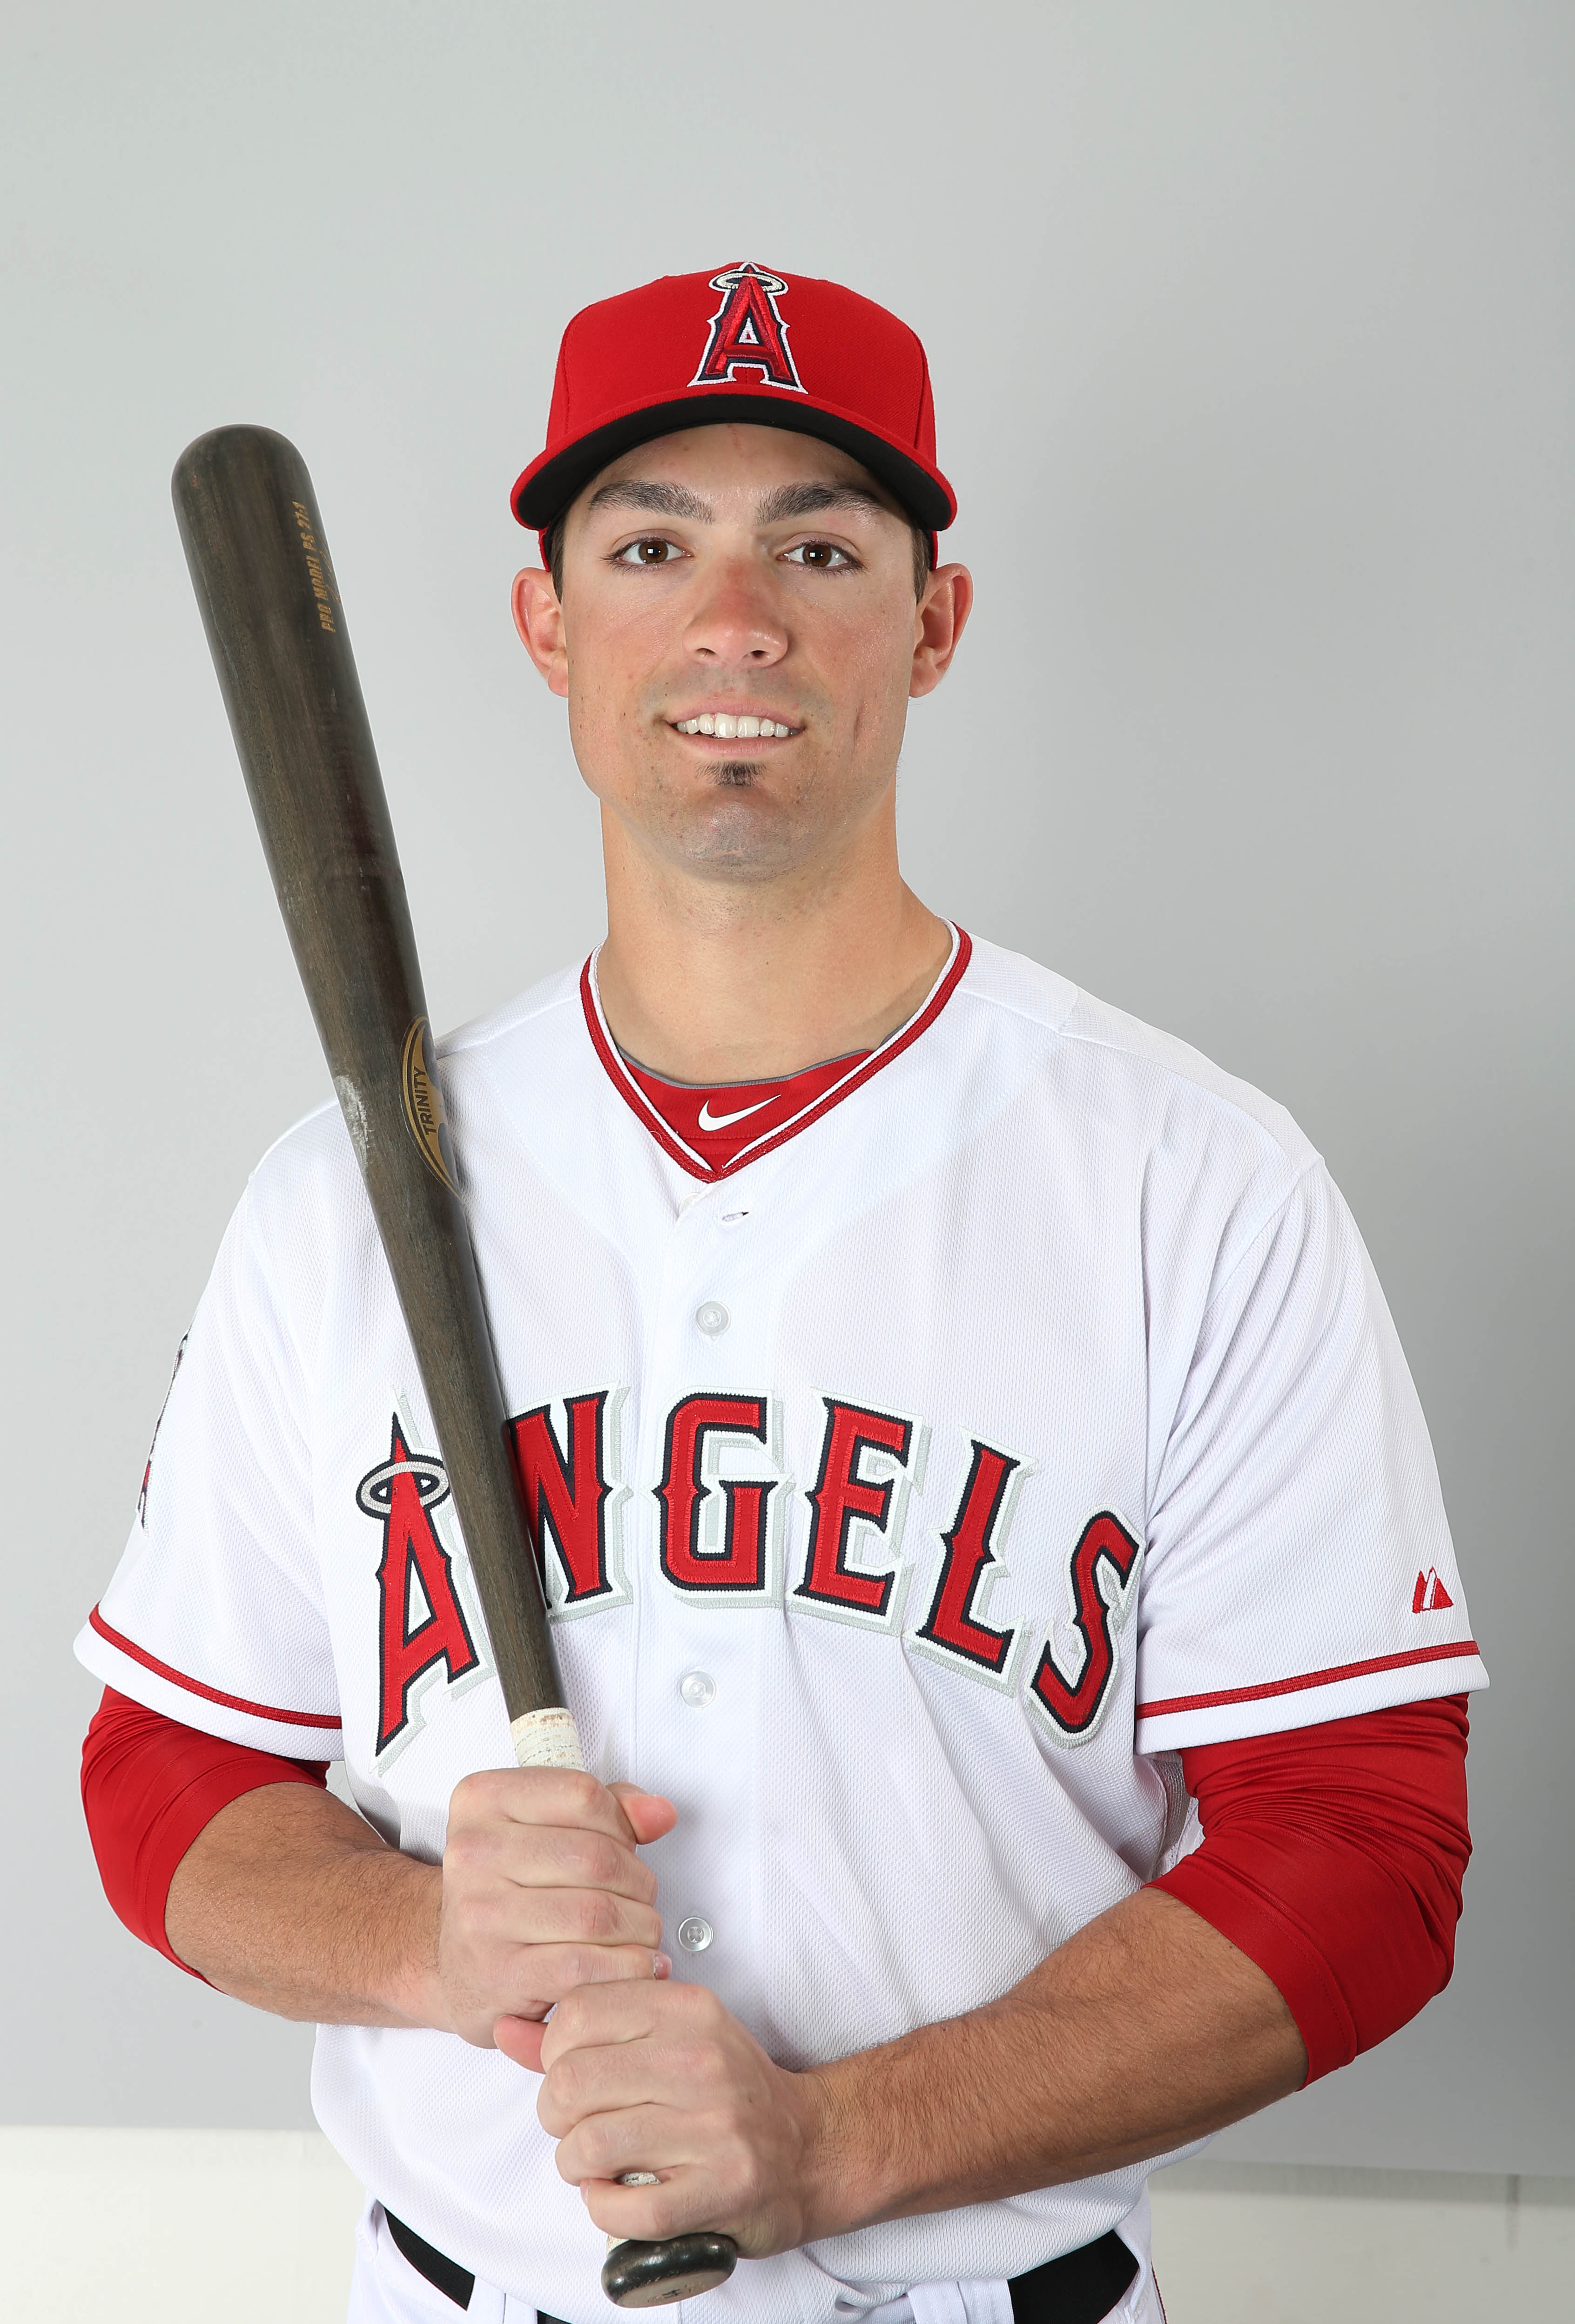 The other guy the Cardinals got for Freese - meet Randal Grichuk